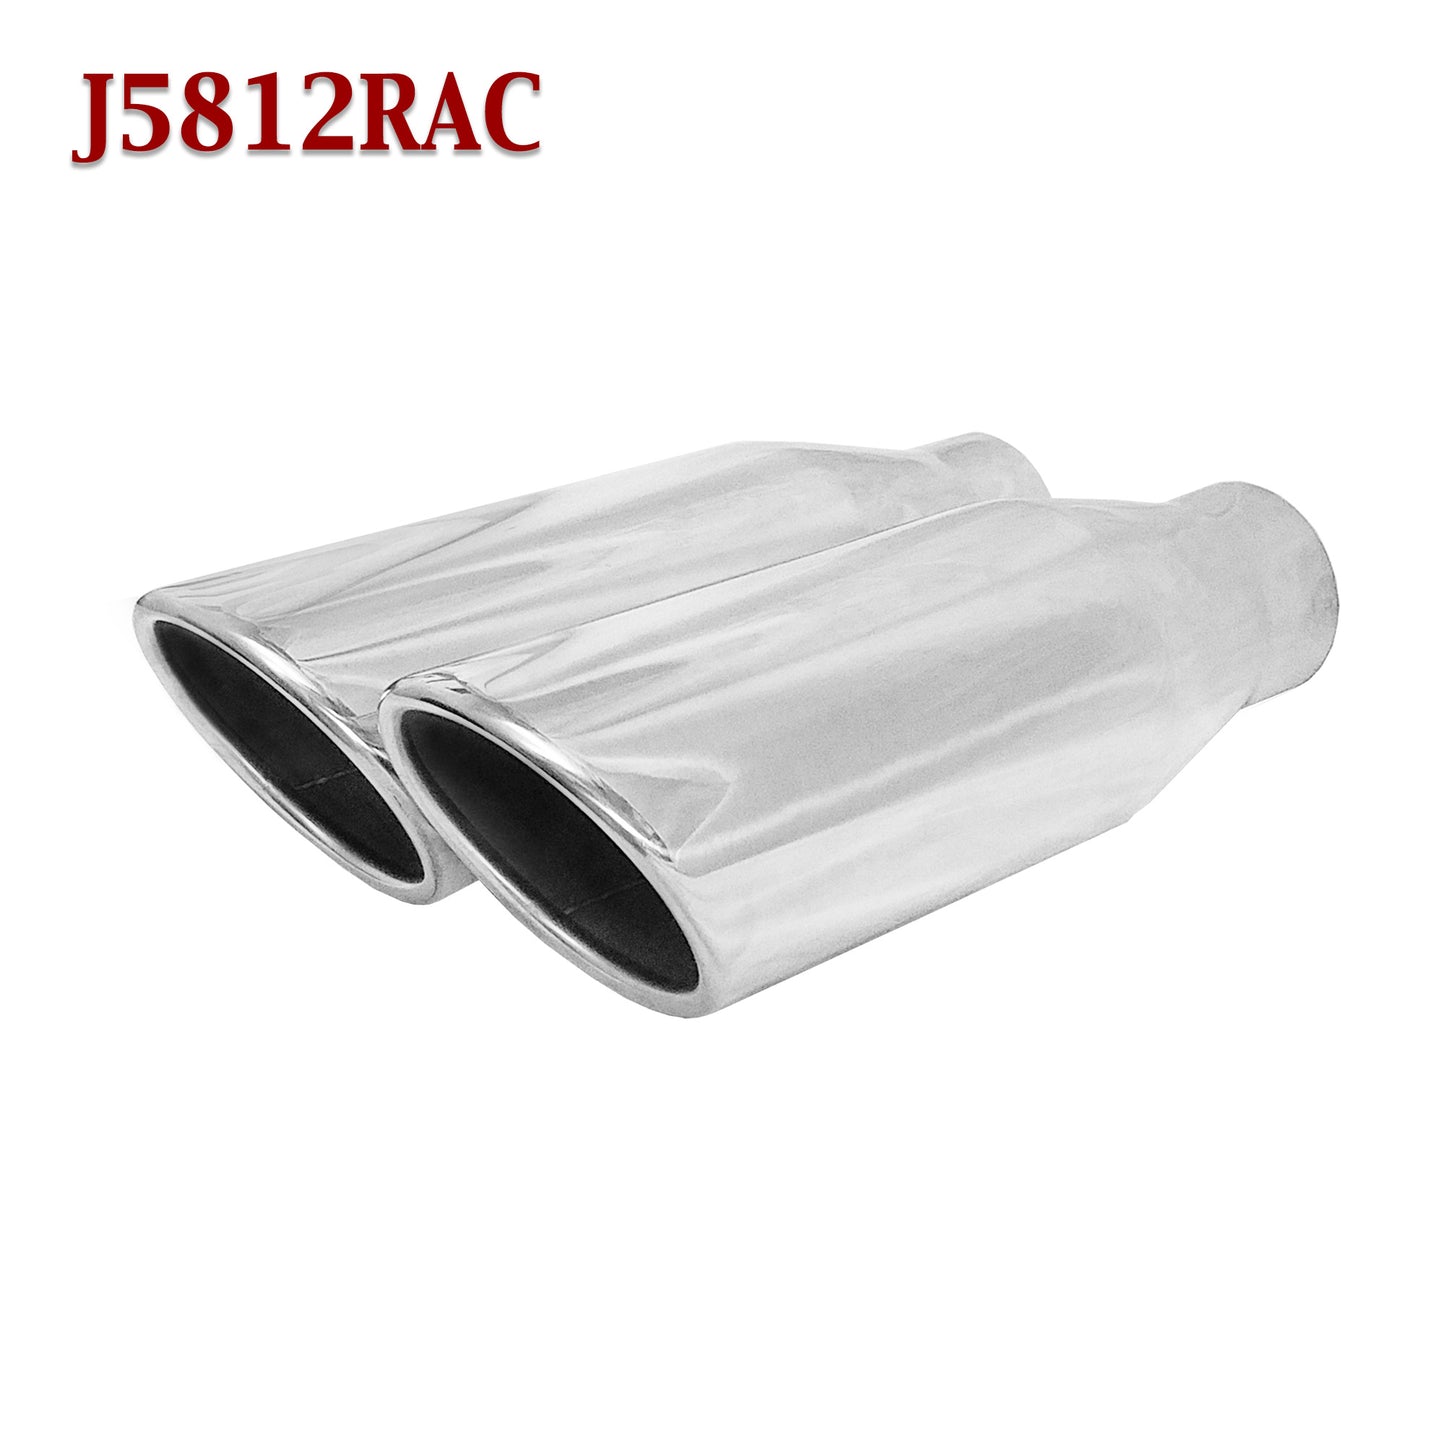 J5812RAC 2.5" Stainless Round Truck Exhaust Tip 2 1/2" Inlet 4" Outlet 12" Long